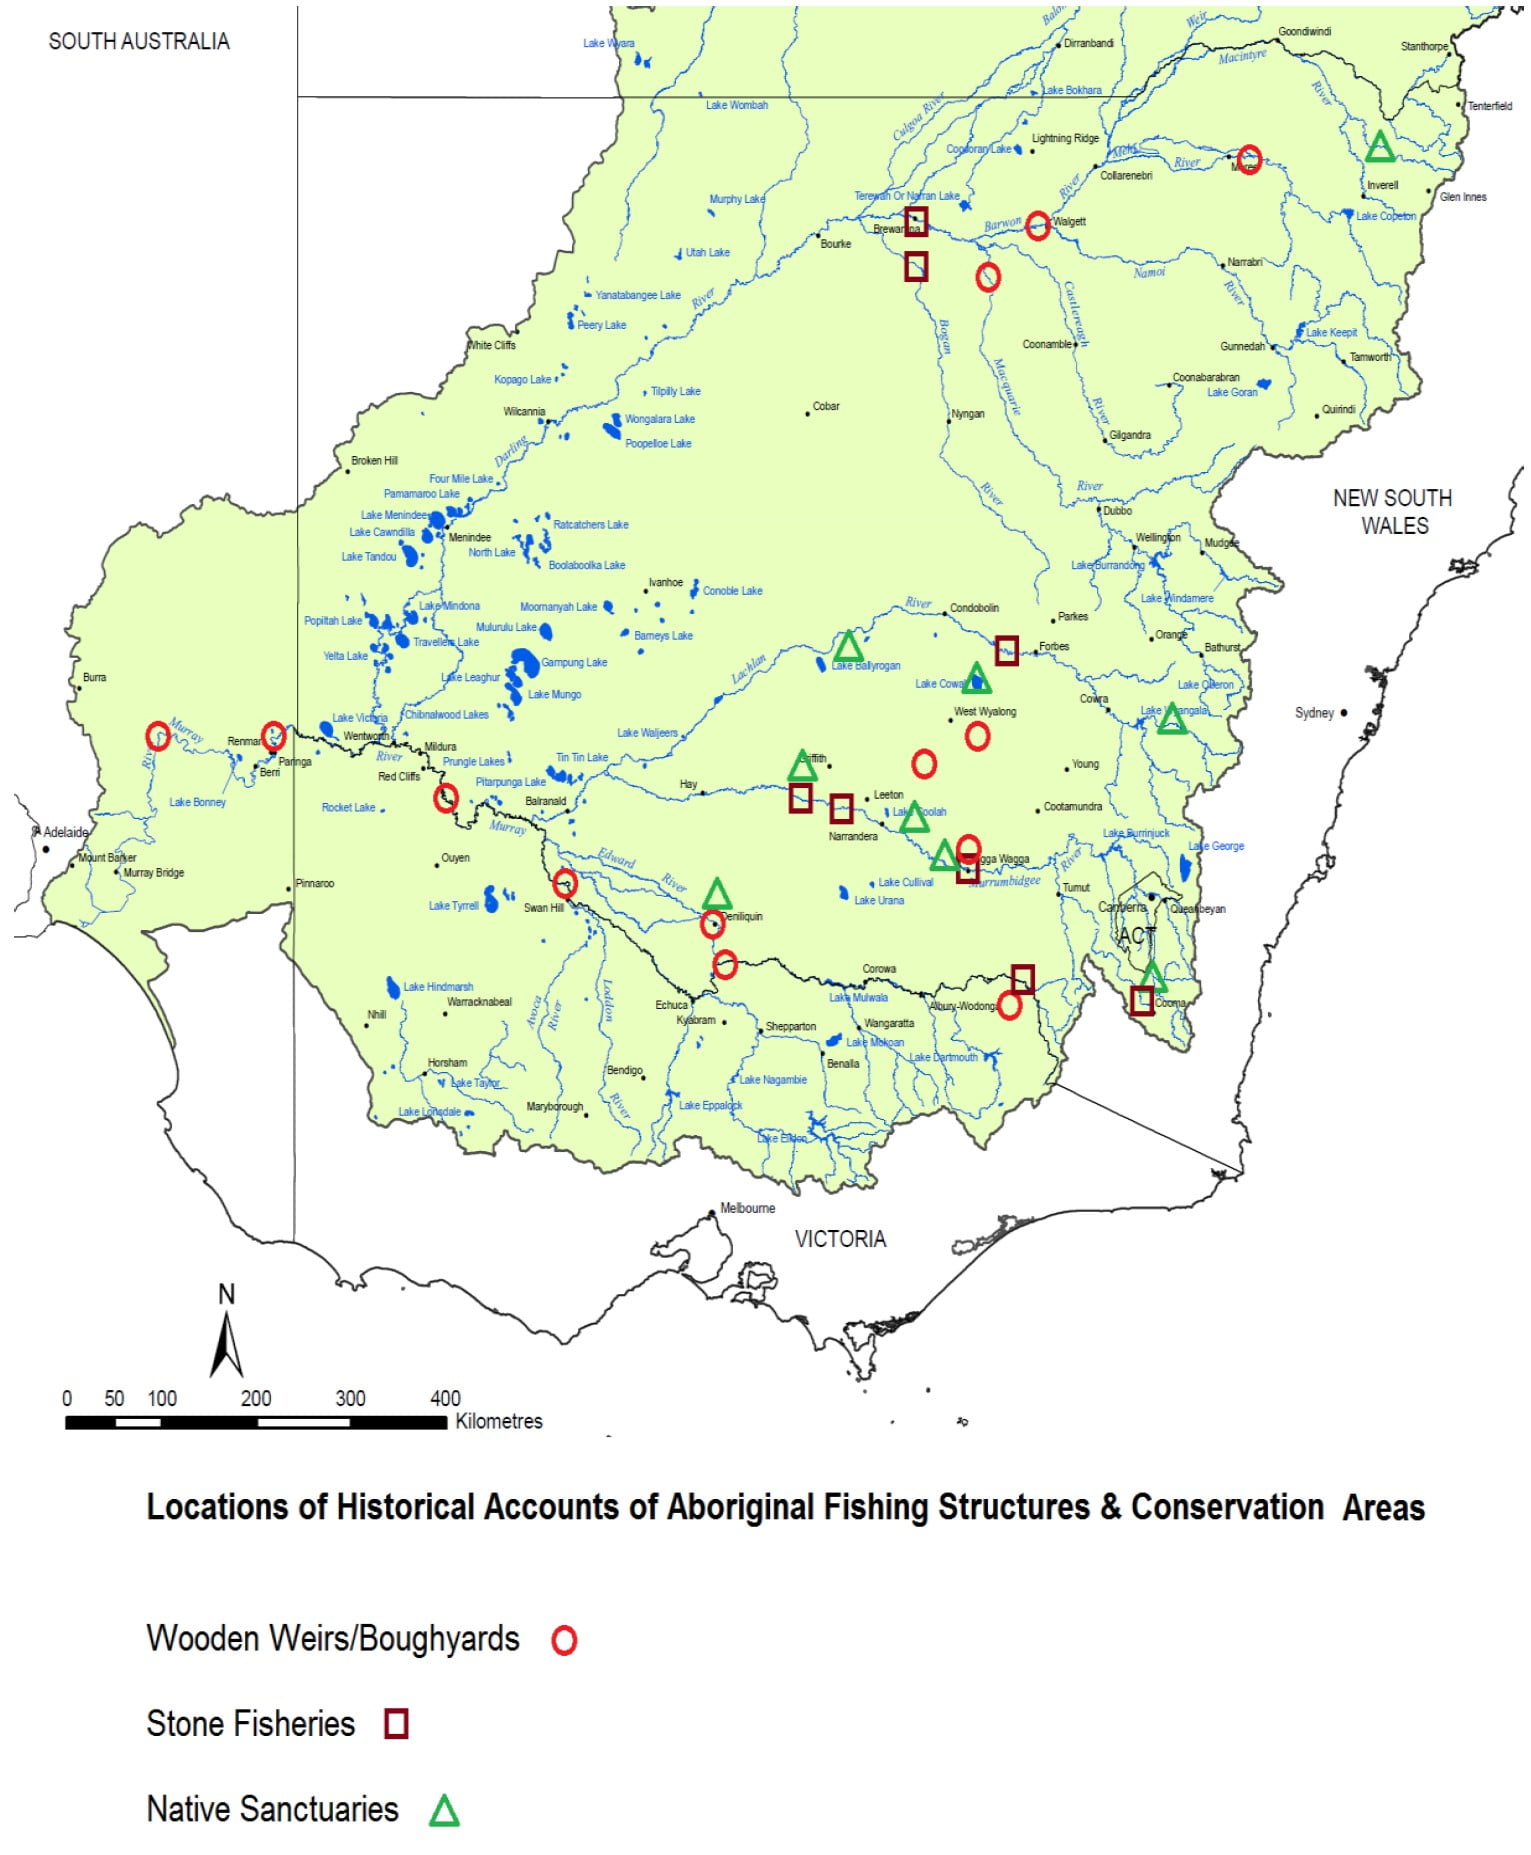 Locations of historical accounts of Aboriginal fishing structures and conservation areas